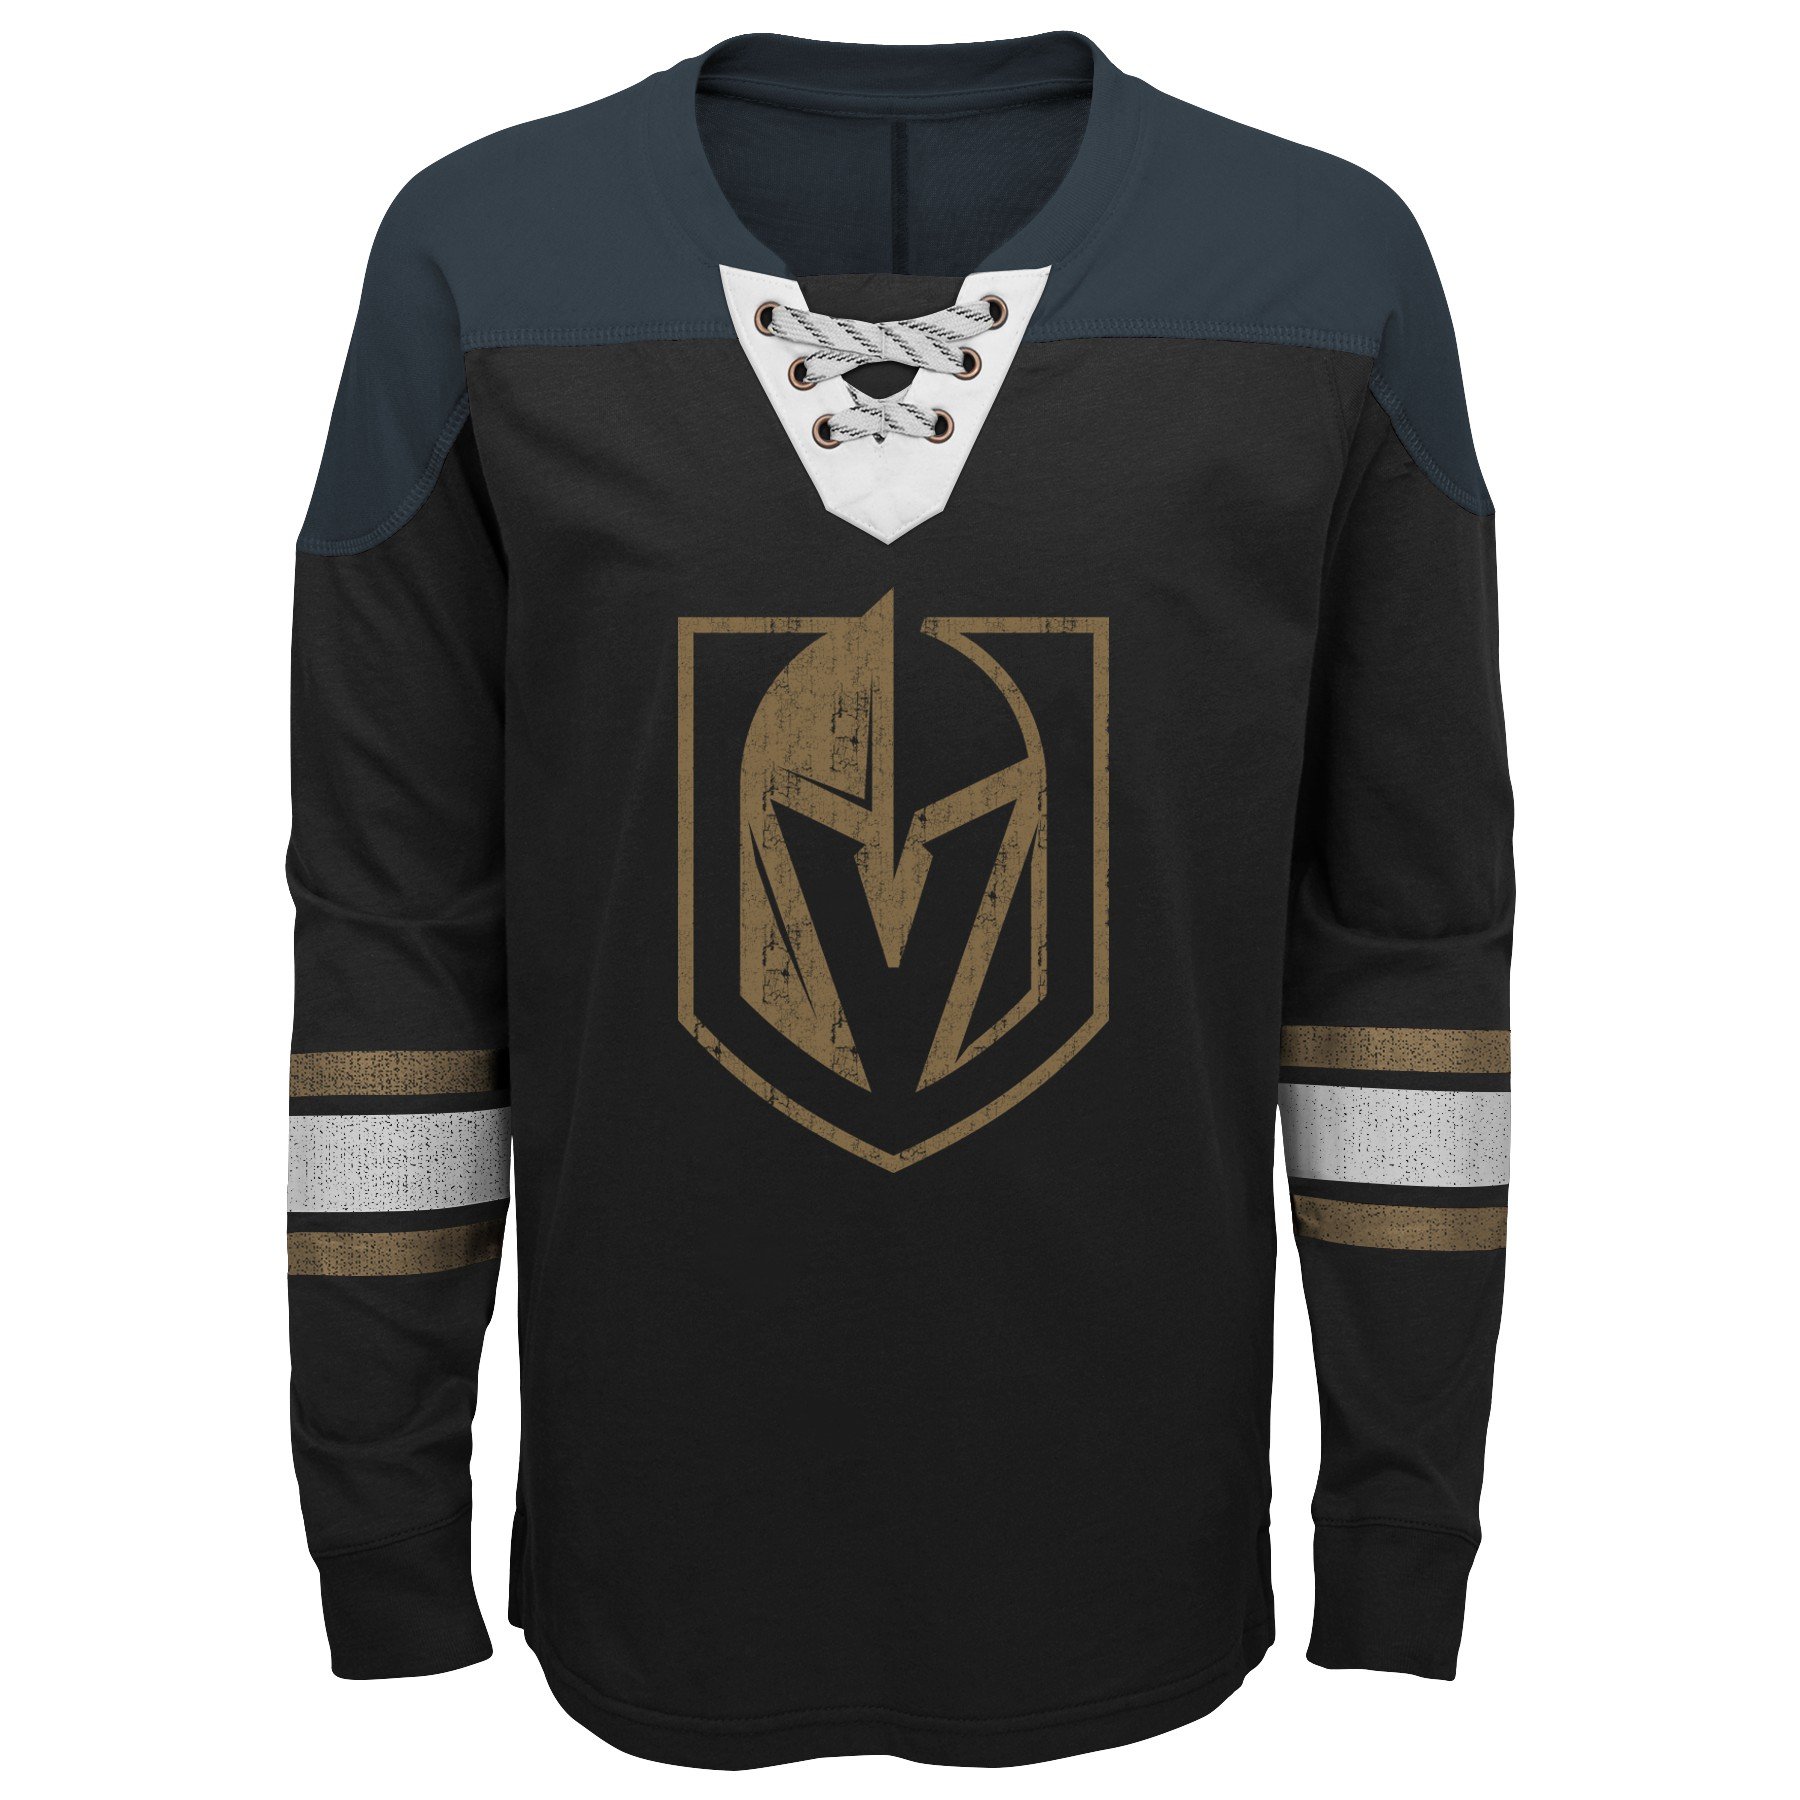 Outerstuff NHL Youth (8-20) Las Vegas Golden Knights Perennial Long Sleeve Shirt - image 1 of 1